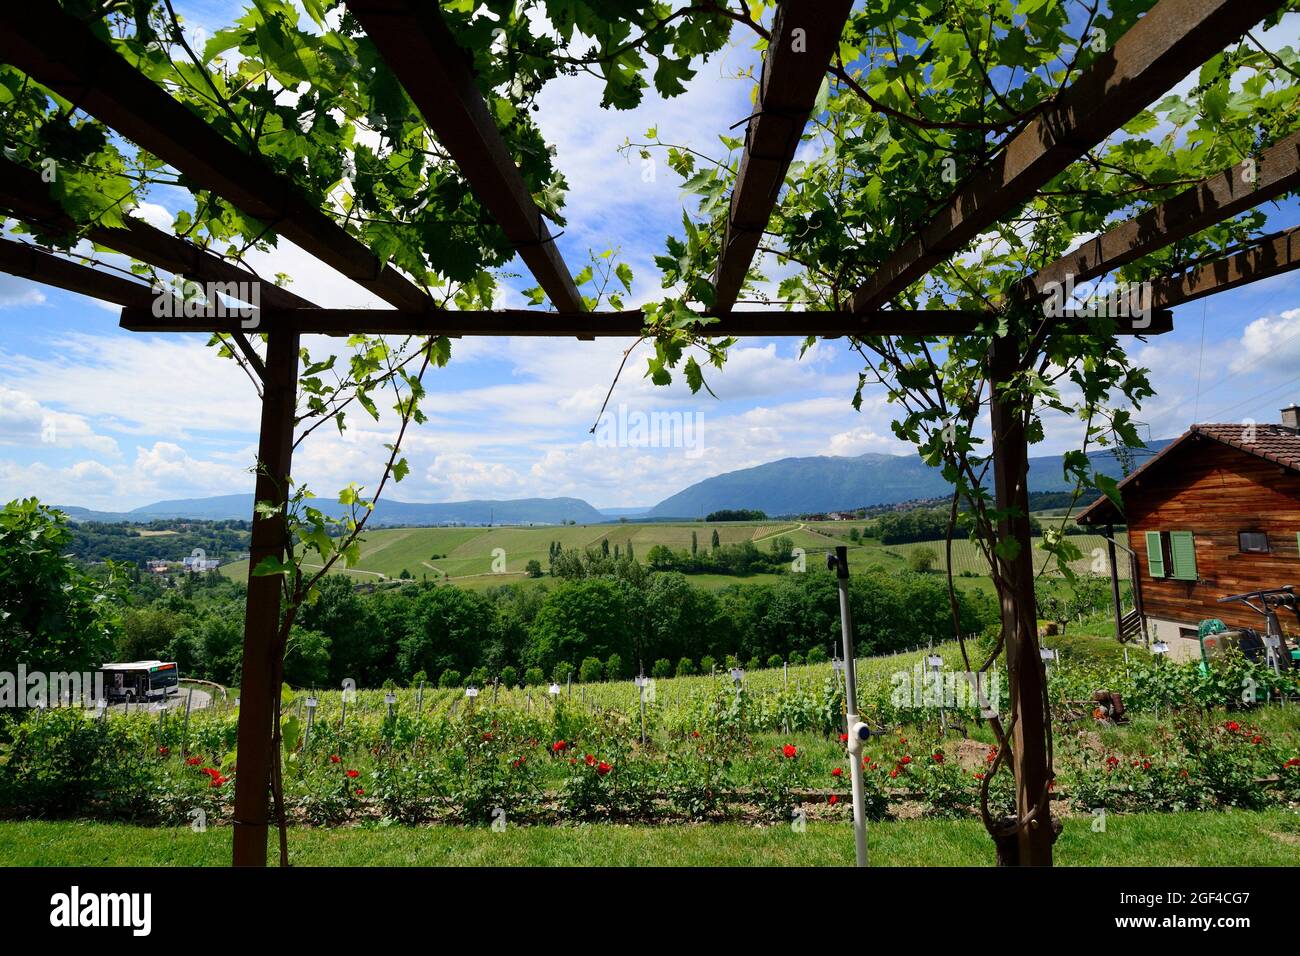 ´La cave de Geneve´ wine region, farm in vineyards, in front pergola overgrown with grapevine, wooden house on right, blooming flowers and vineyards Stock Photo